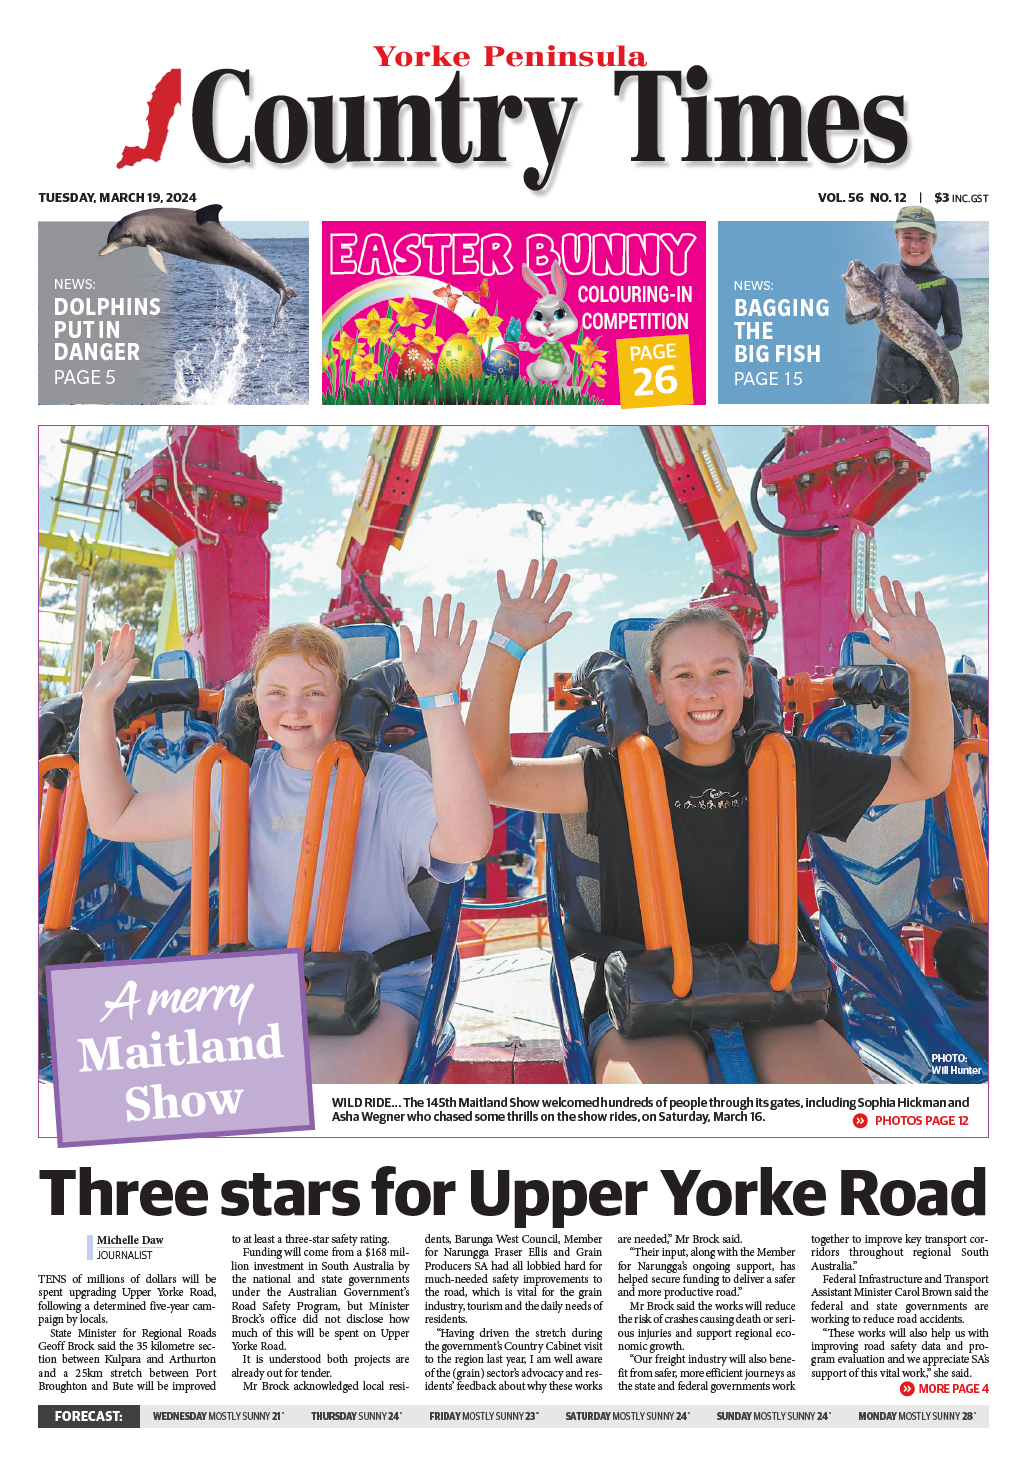 Yorke Peninsula Country Times 19 March 2024